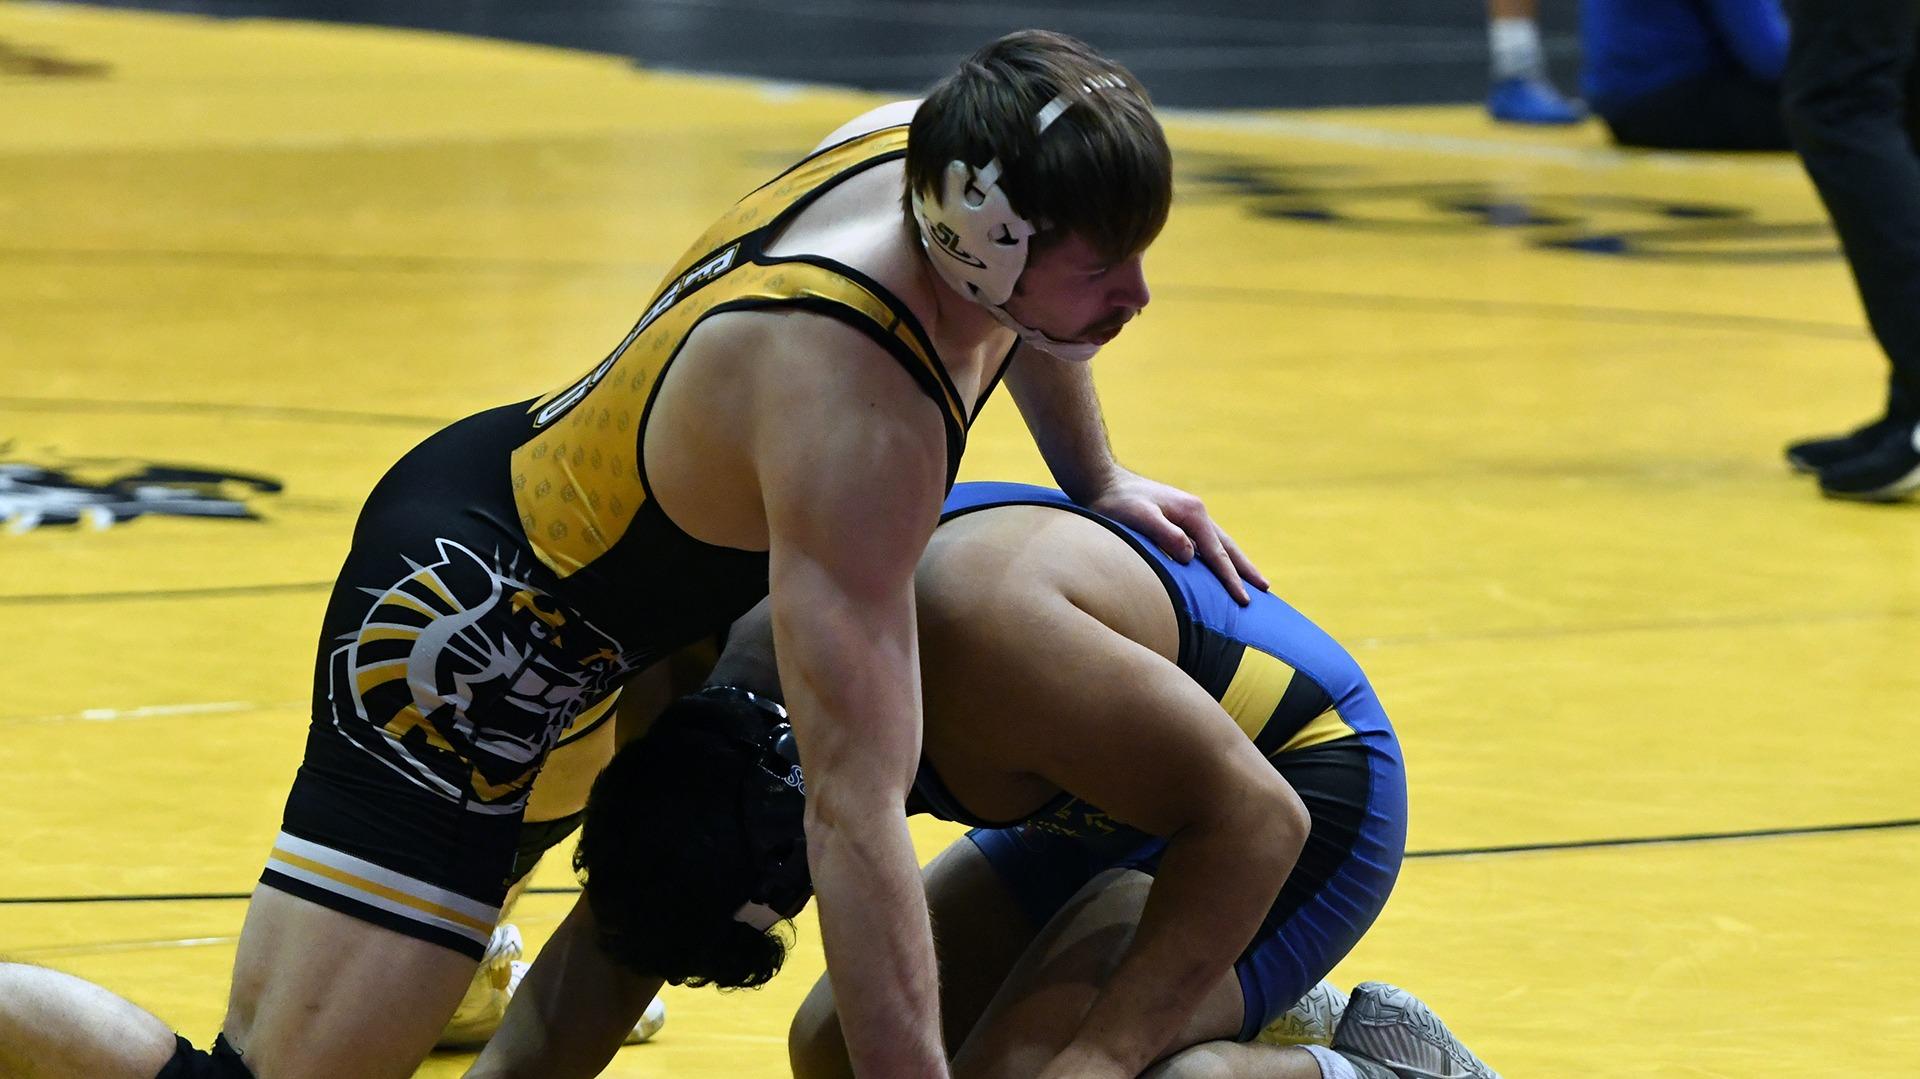 No Tigers Fall To Ranked Opponents At Midwest Duals Fhsu